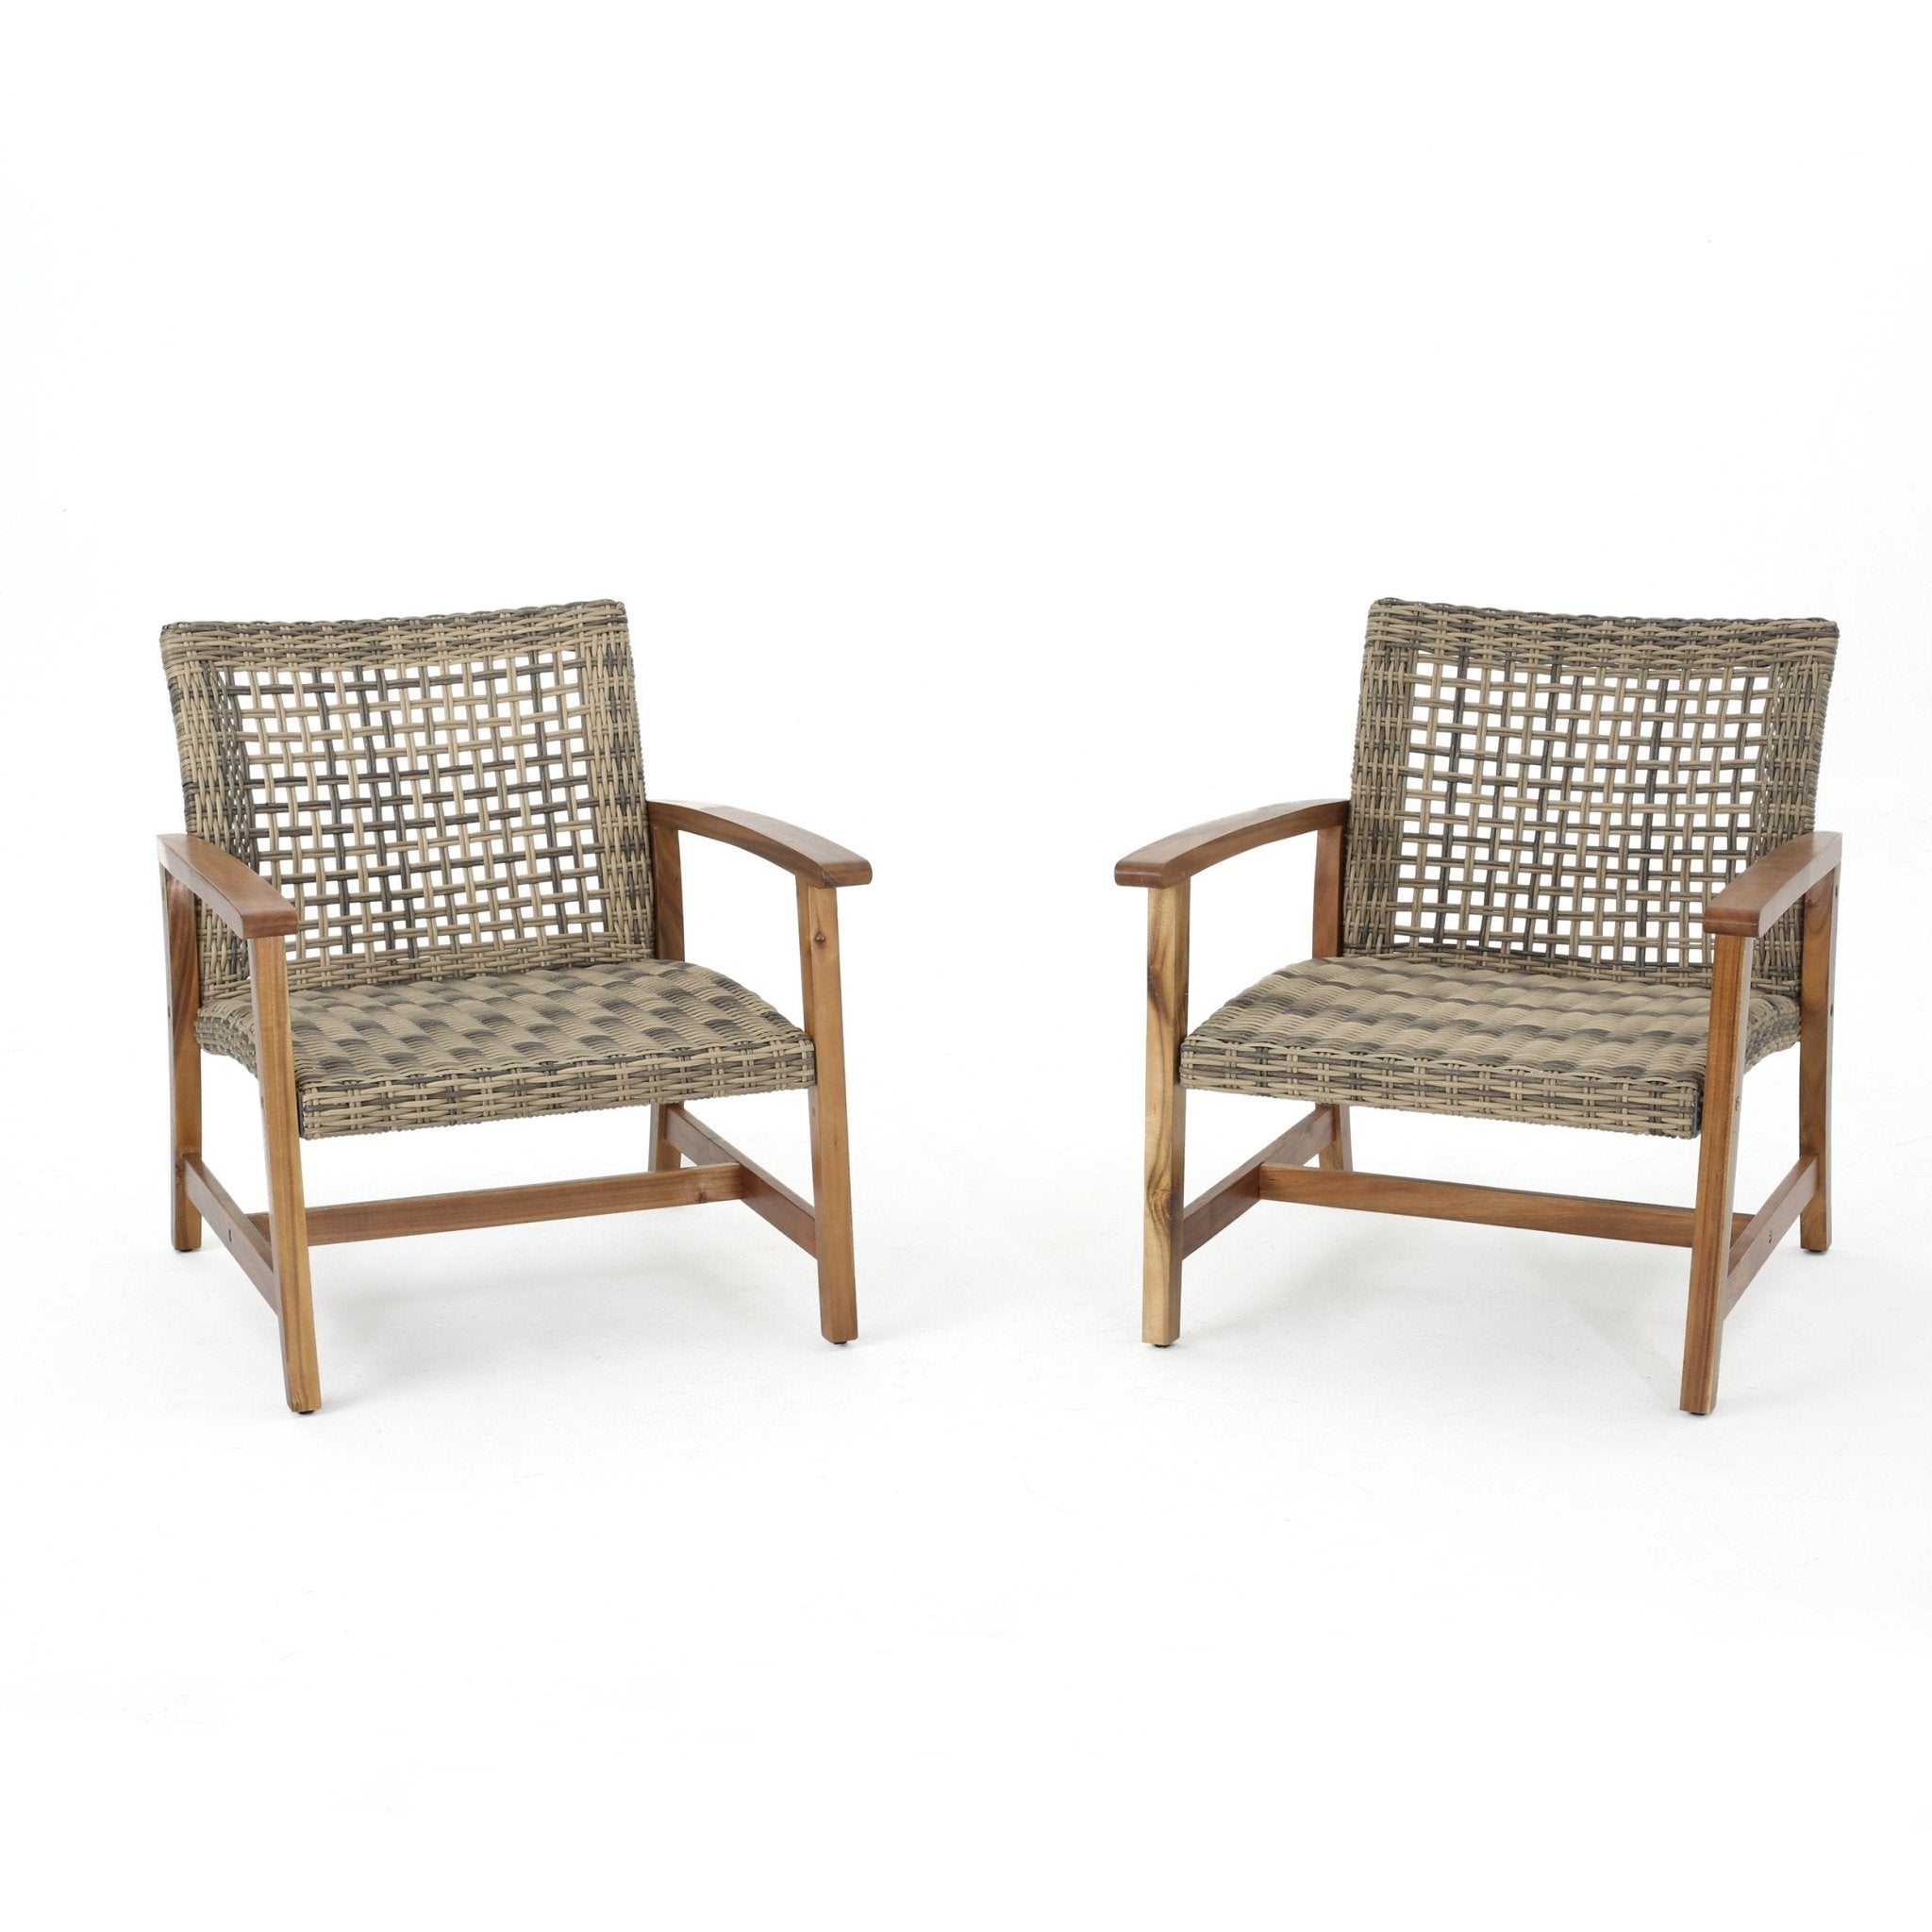 Gorgeous Outdoor Club Chairs with Acacia Wood and Iron Construction, Set of 2 - Outdoor Seating